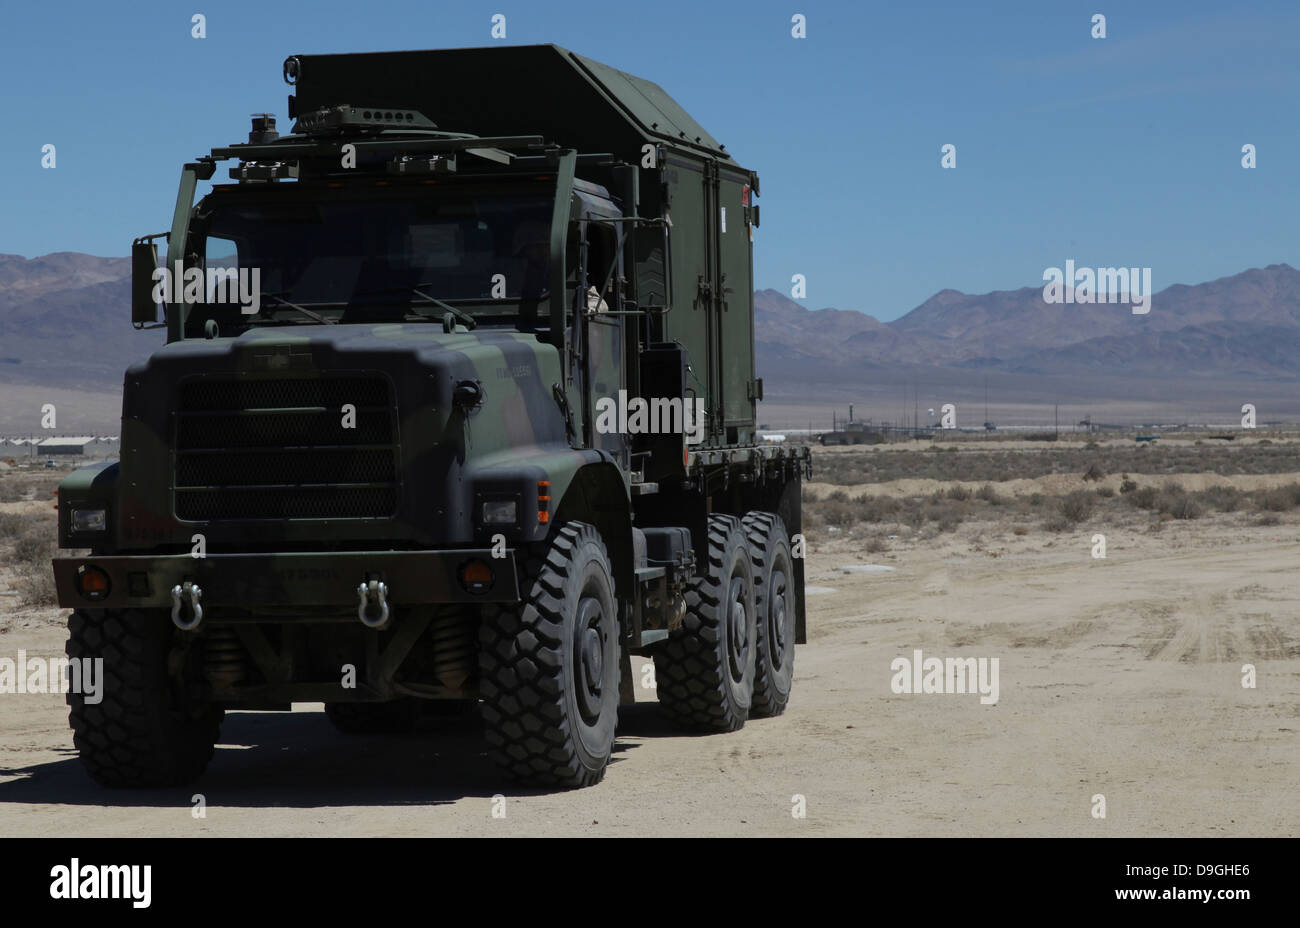 July 19, 2011 - A Medium Tactical Vehicle Replacement loaded with medical supplies. Stock Photo